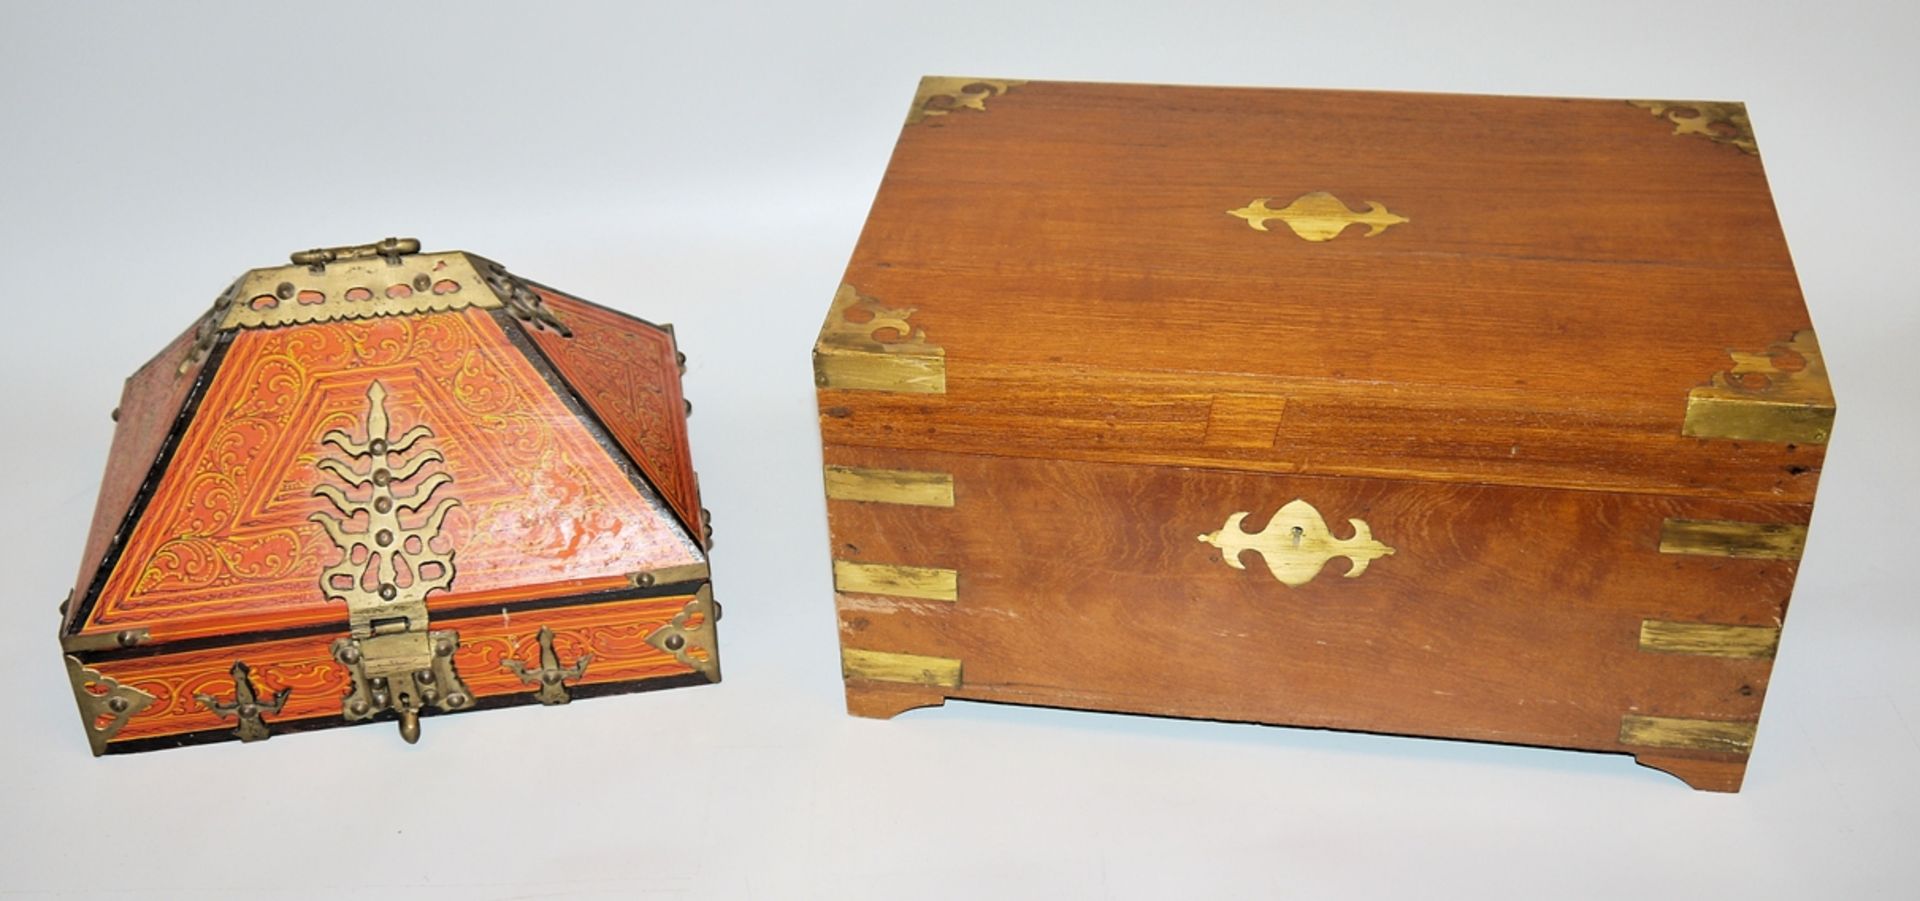 Two Indian wooden jewellery or utensil boxes